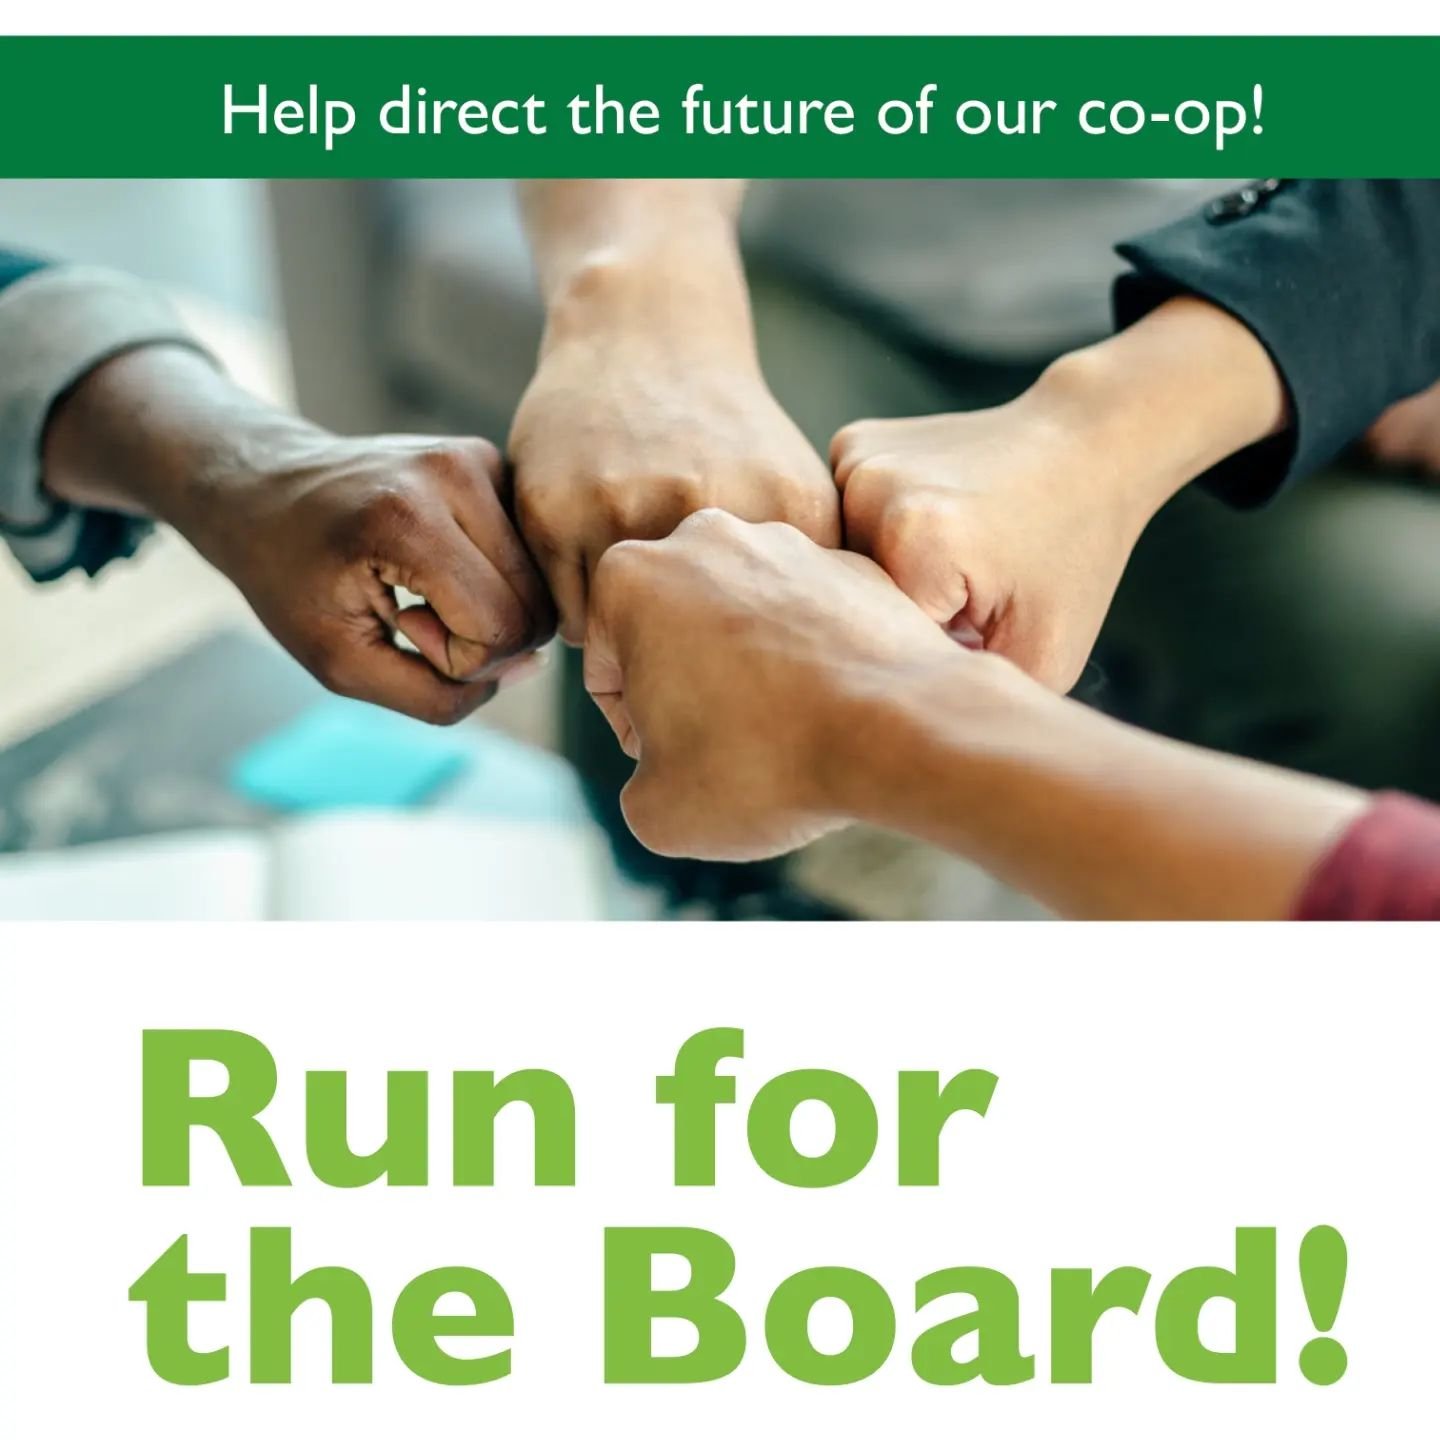 Run for our co-op Board of Directors! Applications are now available on our website. 

The Board is comprised of 9 owners, elected by the general ownership. They serve a three year term. Any owner can run for the board, and benefits include a 15% dis